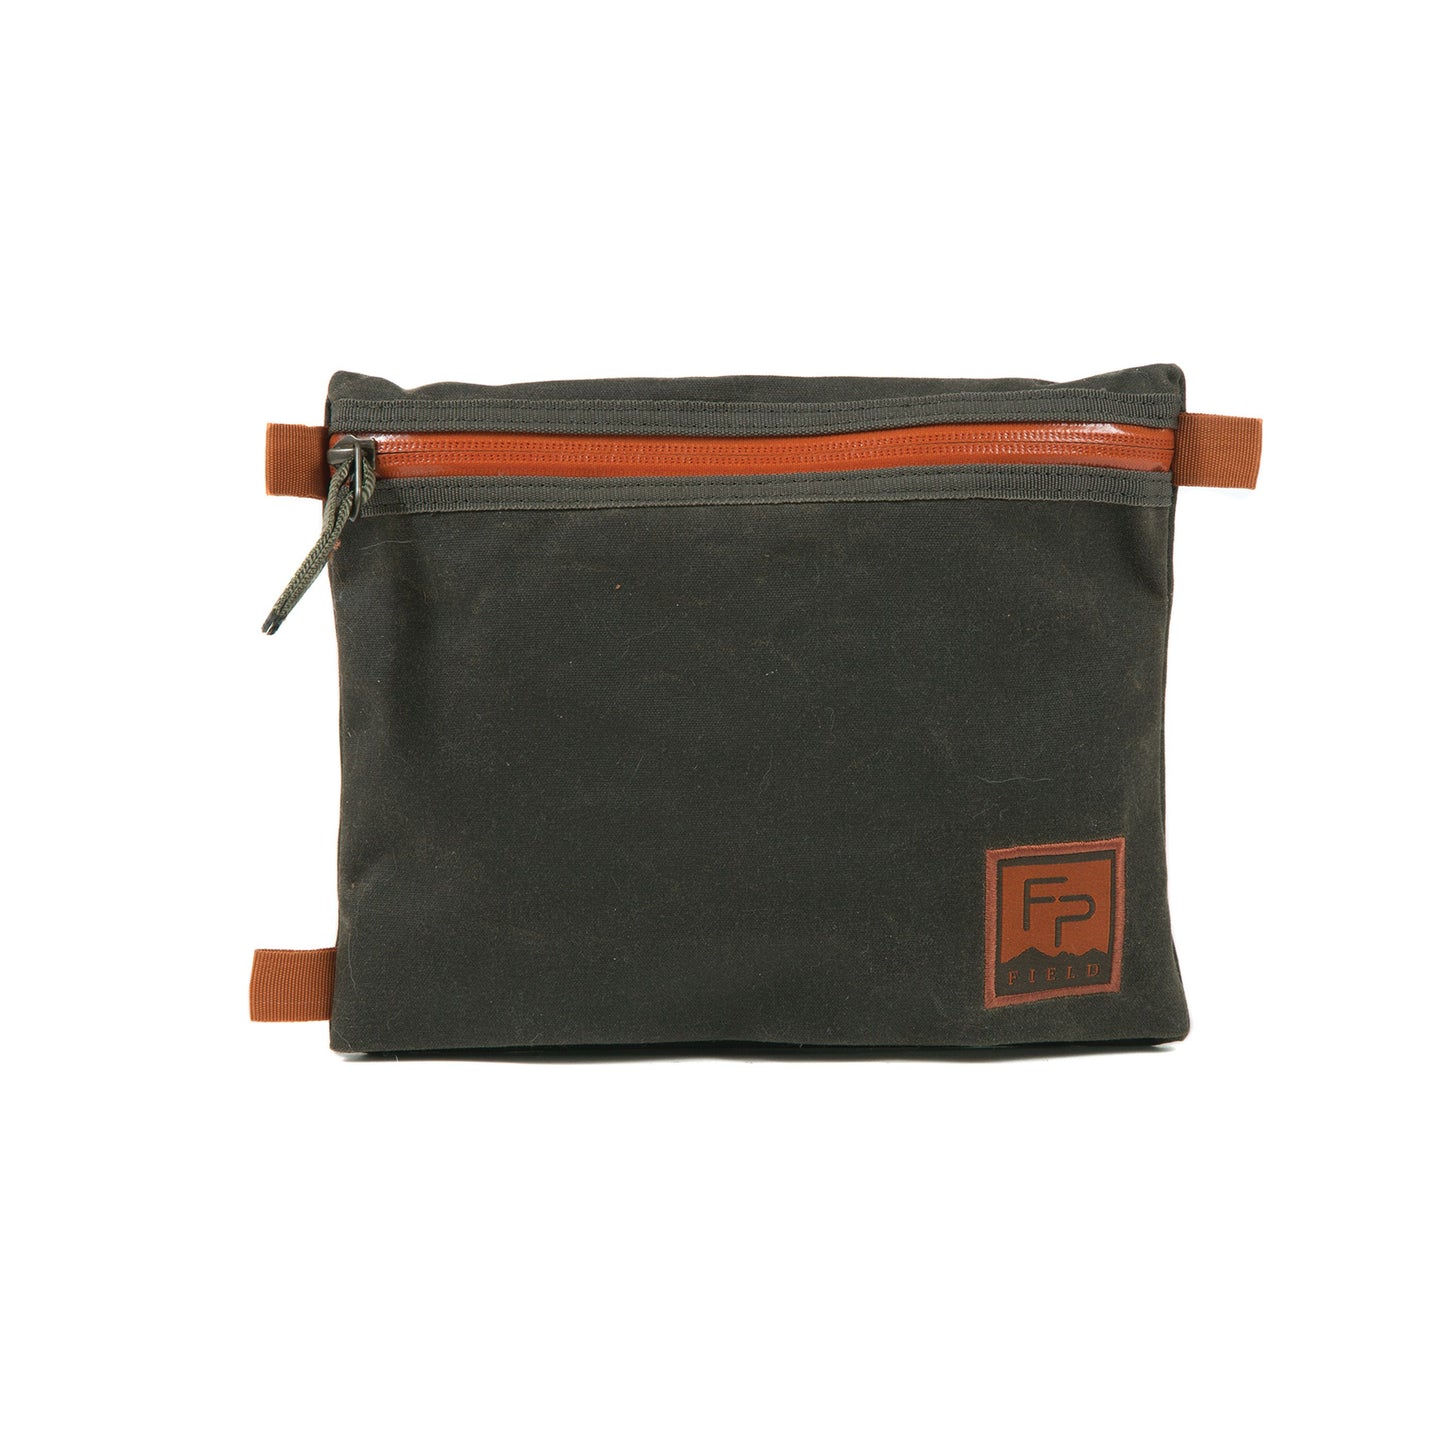 Peat Moss | Peat Moss Eagle's Nest Travel Pouch